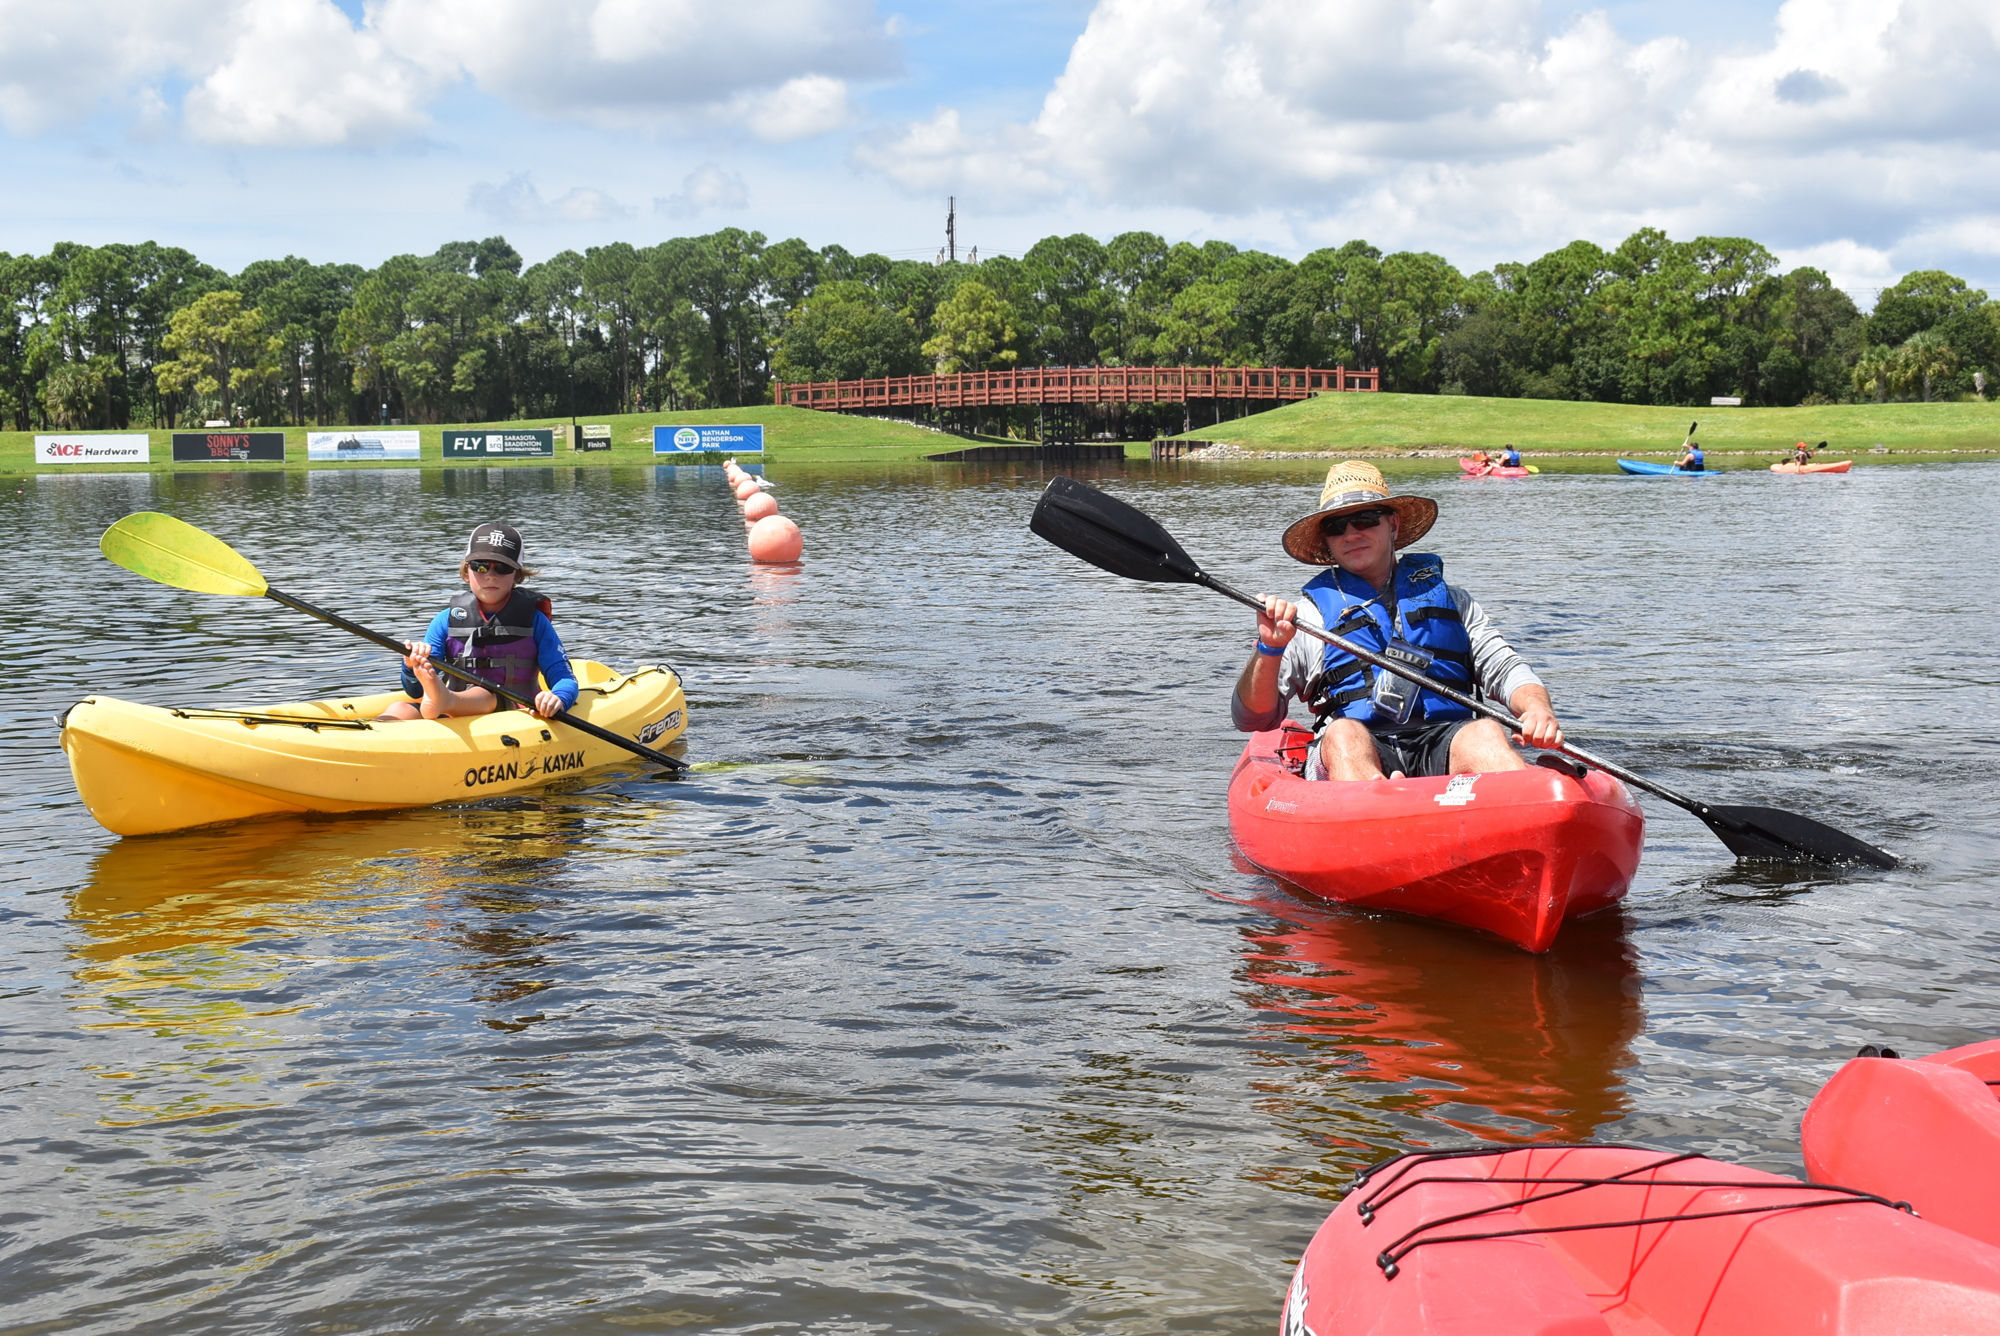 Max Dierdorf and Doug Dierdorf of central Bradenton come to shore during Rec Days on Sept. 19. Rec Days was a constant source of revenue for the park during the COVID-19 pandemic.